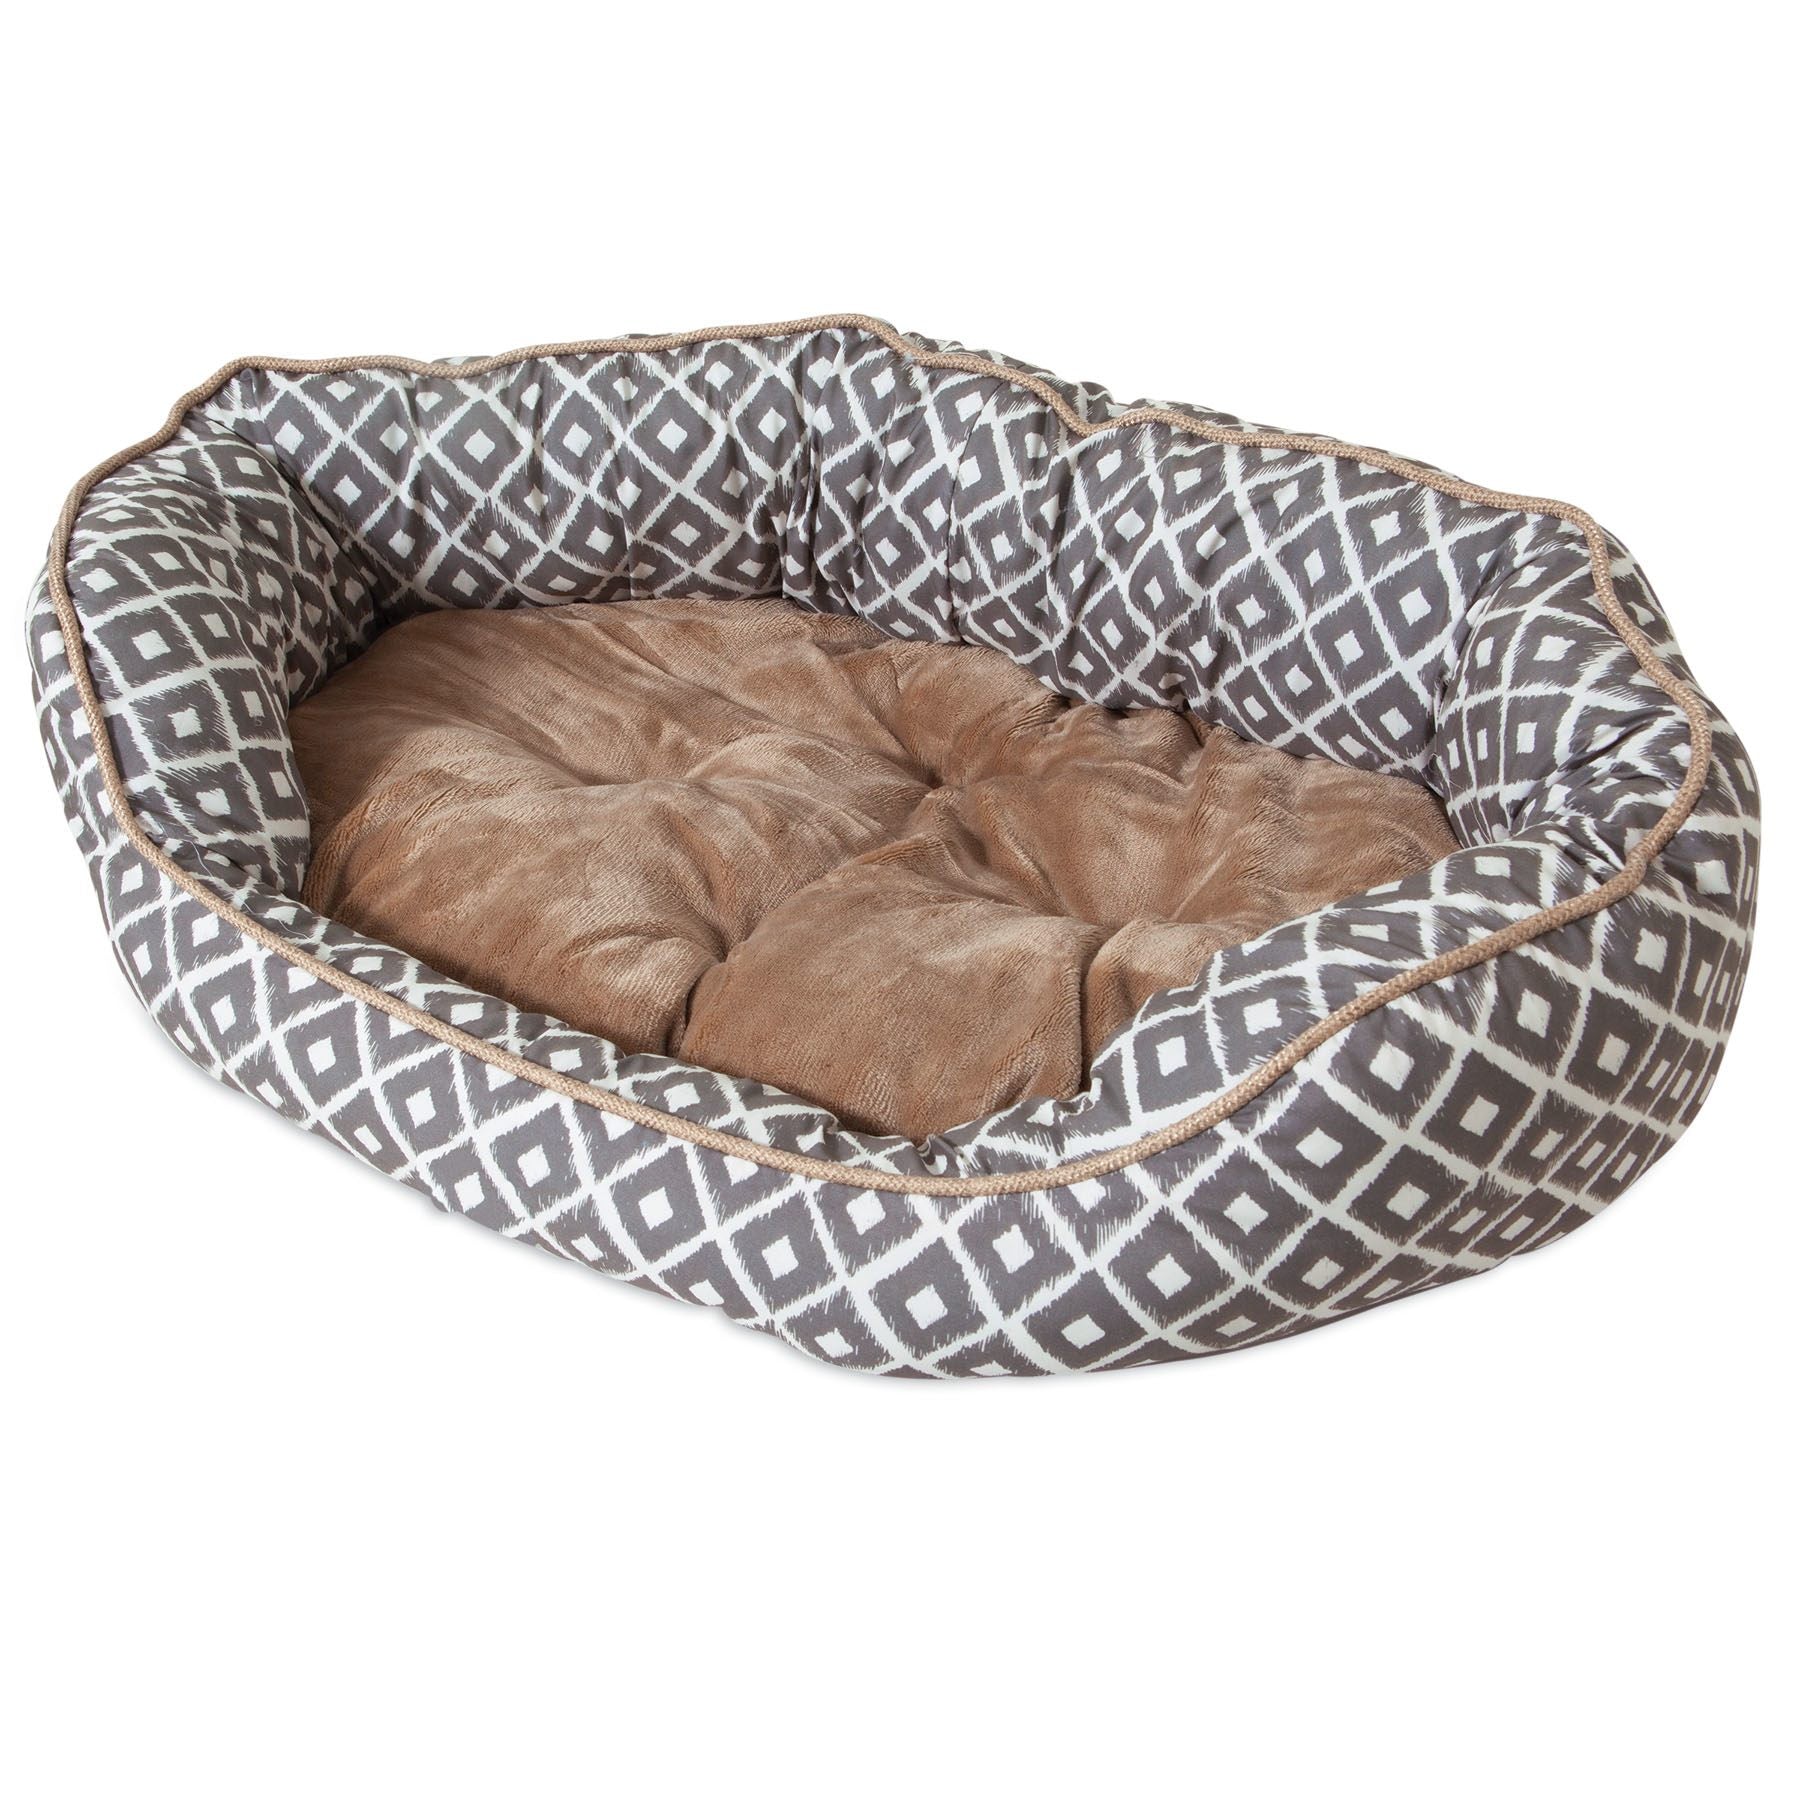 SnooZZy IKAT Daydreamer Bed - Gray